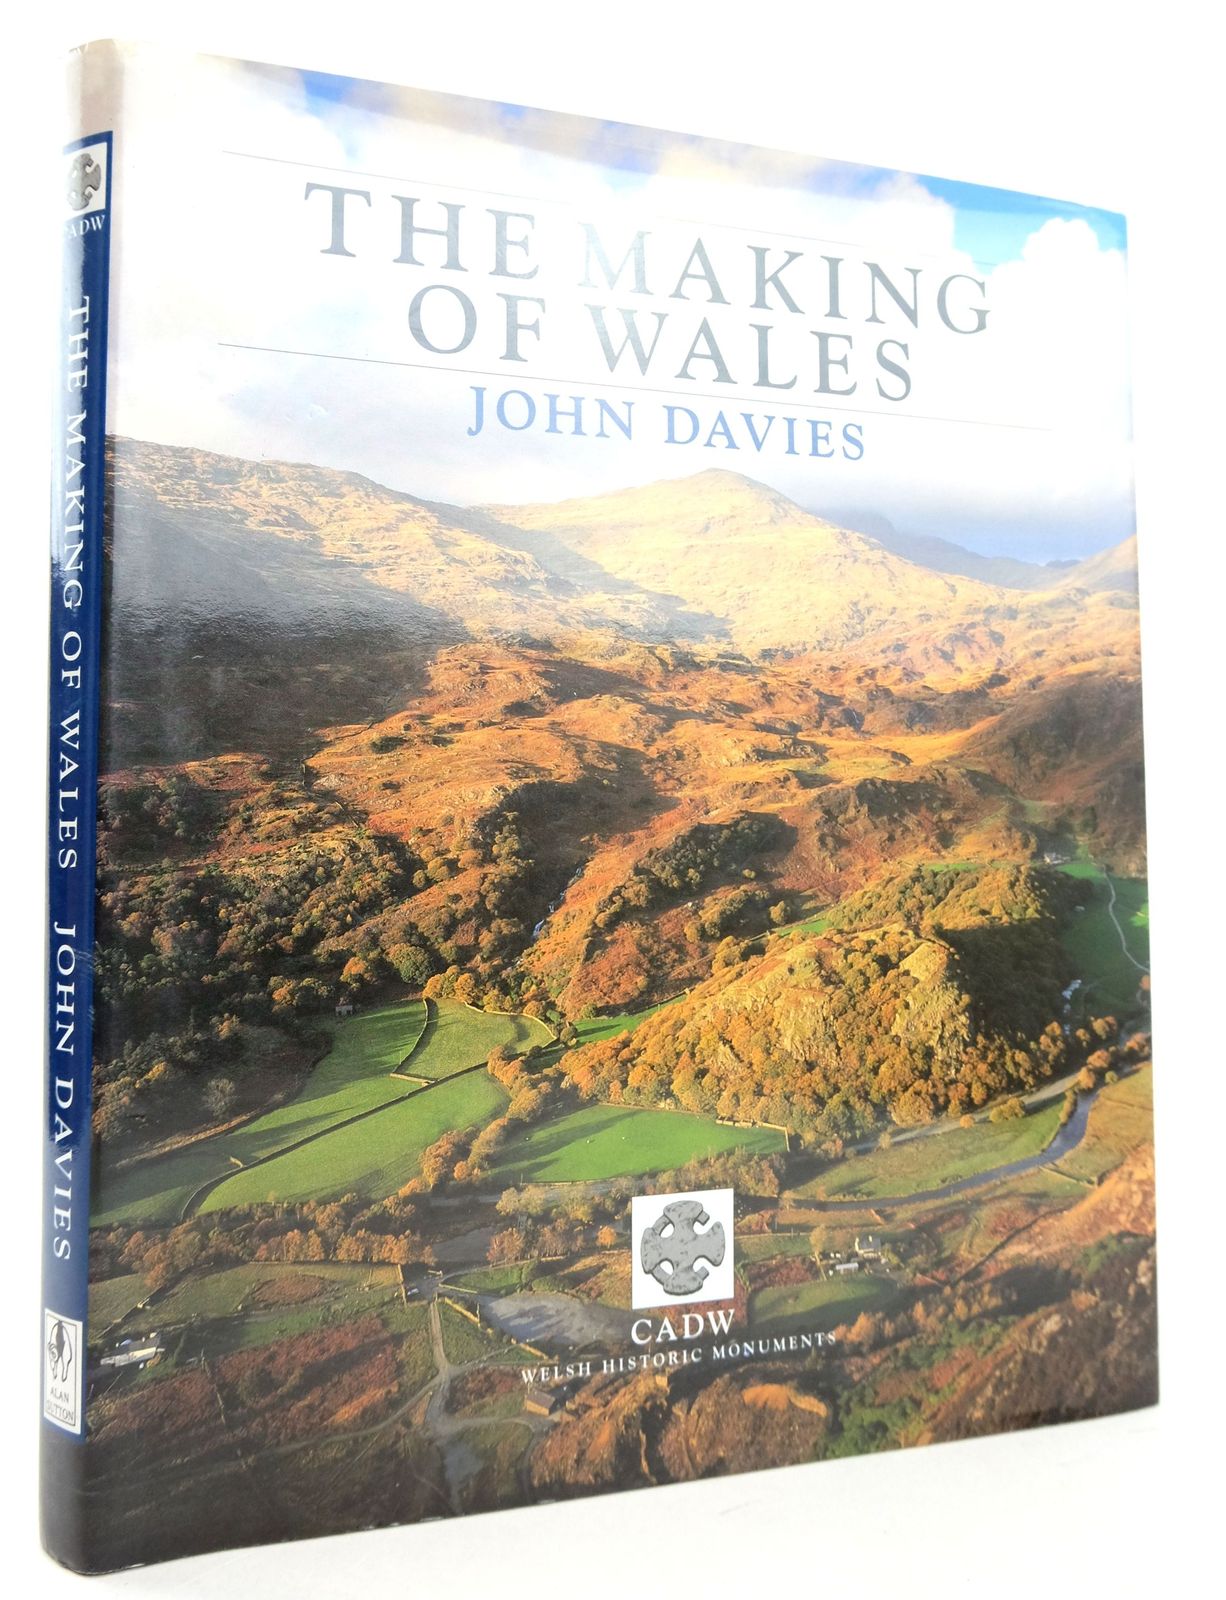 Photo of THE MAKING OF WALES written by Davies, John published by Alan Sutton (STOCK CODE: 1819345)  for sale by Stella & Rose's Books